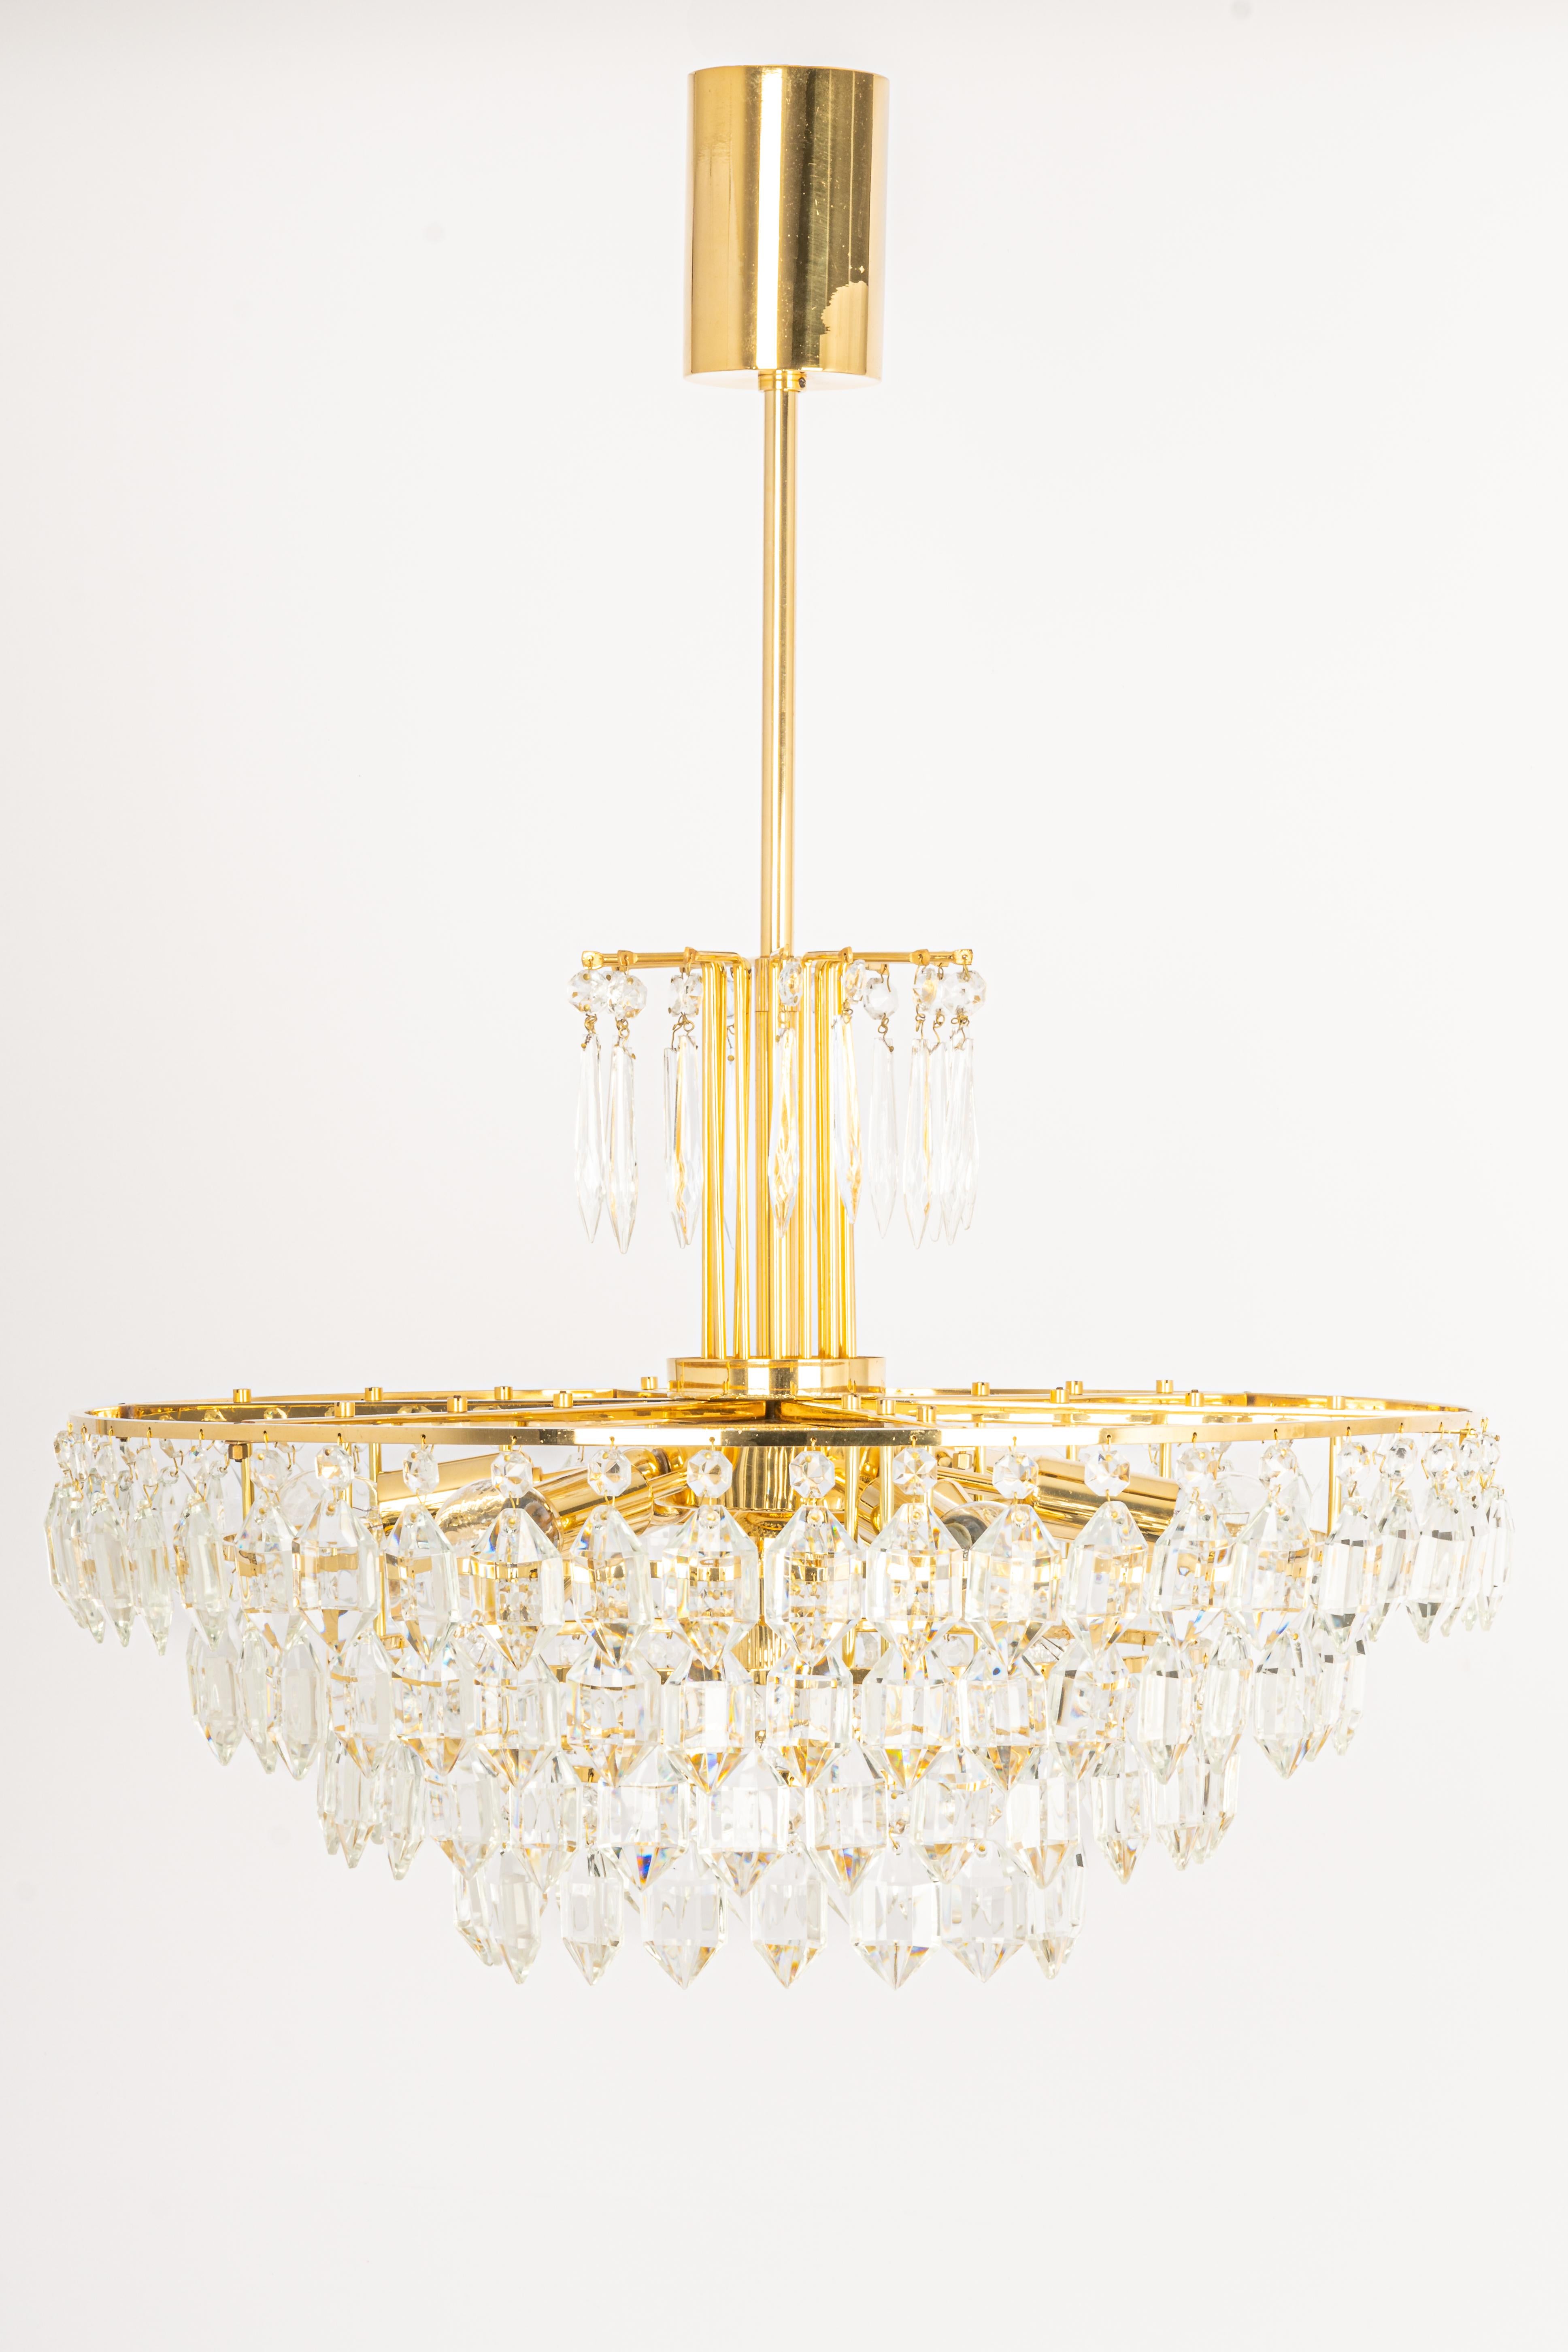 A stunning five-tier chandelier by Bakalowits & Sohne, Austria, manufactured in circa 1960-1969. A handmade and high-quality piece. The ceiling fixture and the frame are made of gilt brass and have five rings with lots of facetted crystal glass